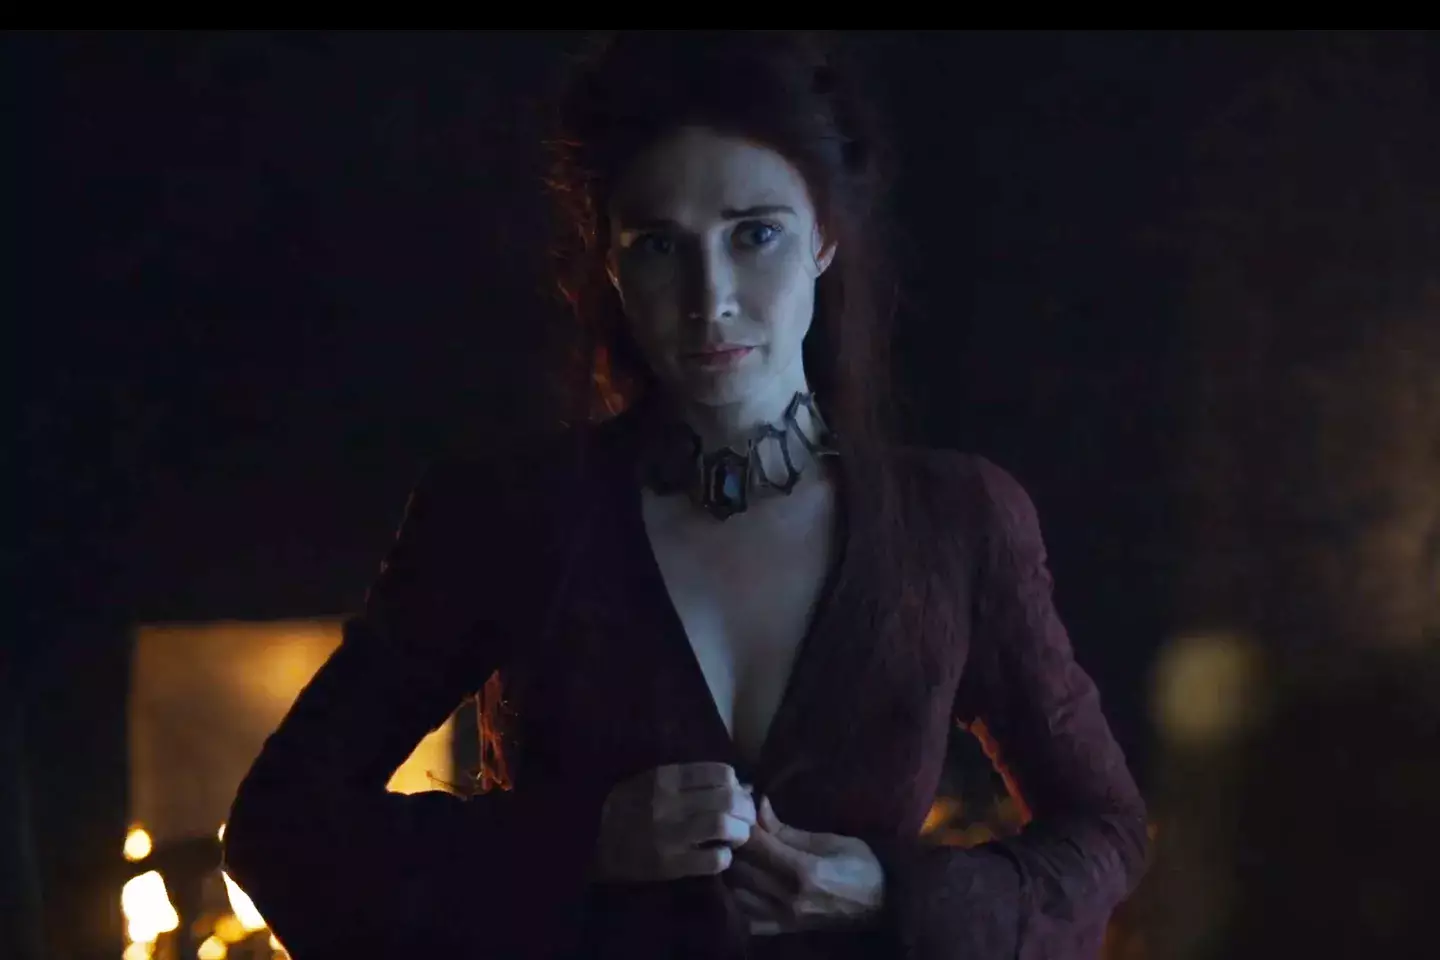 Could Melisandre tip up in House of the Dragon?